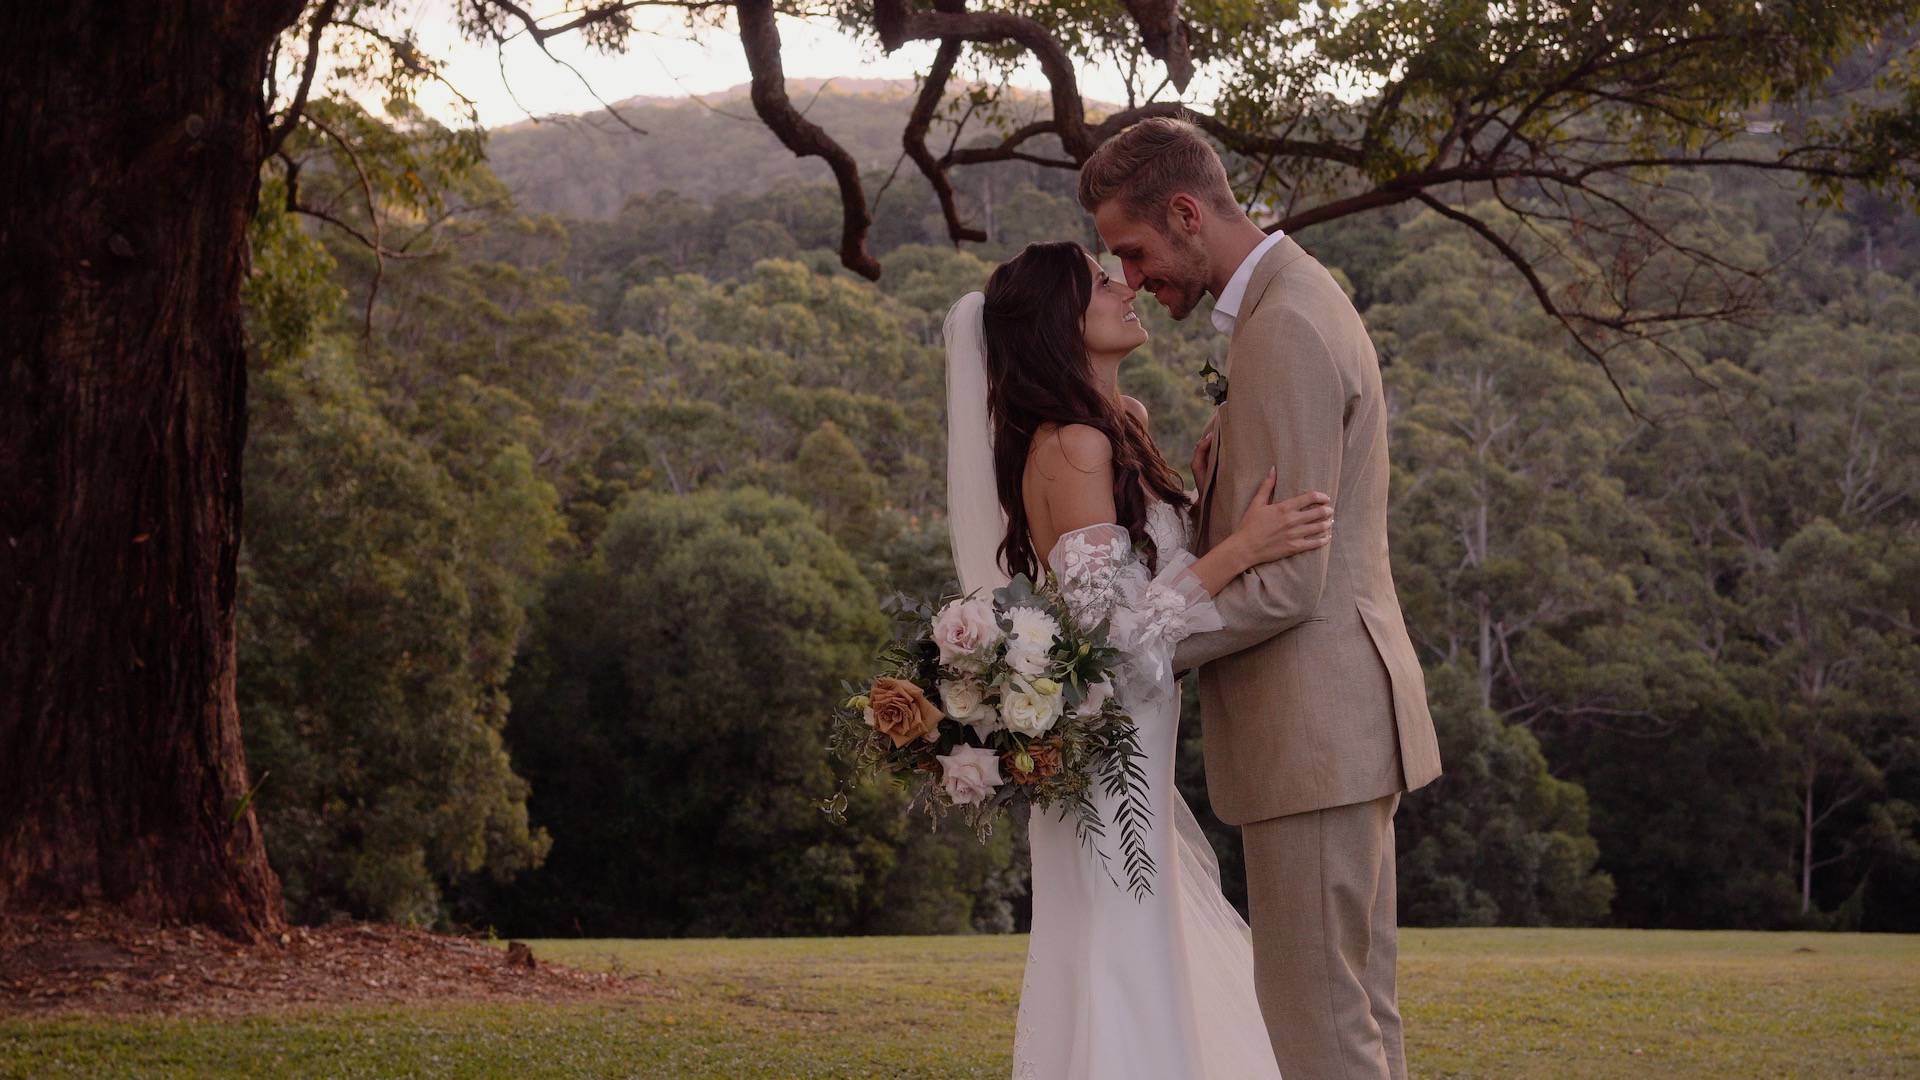 Newly married couple under an old tree in Gold Coast Hinterland - wedding videography services in Gold Coast and surrounding areas - Lovereel